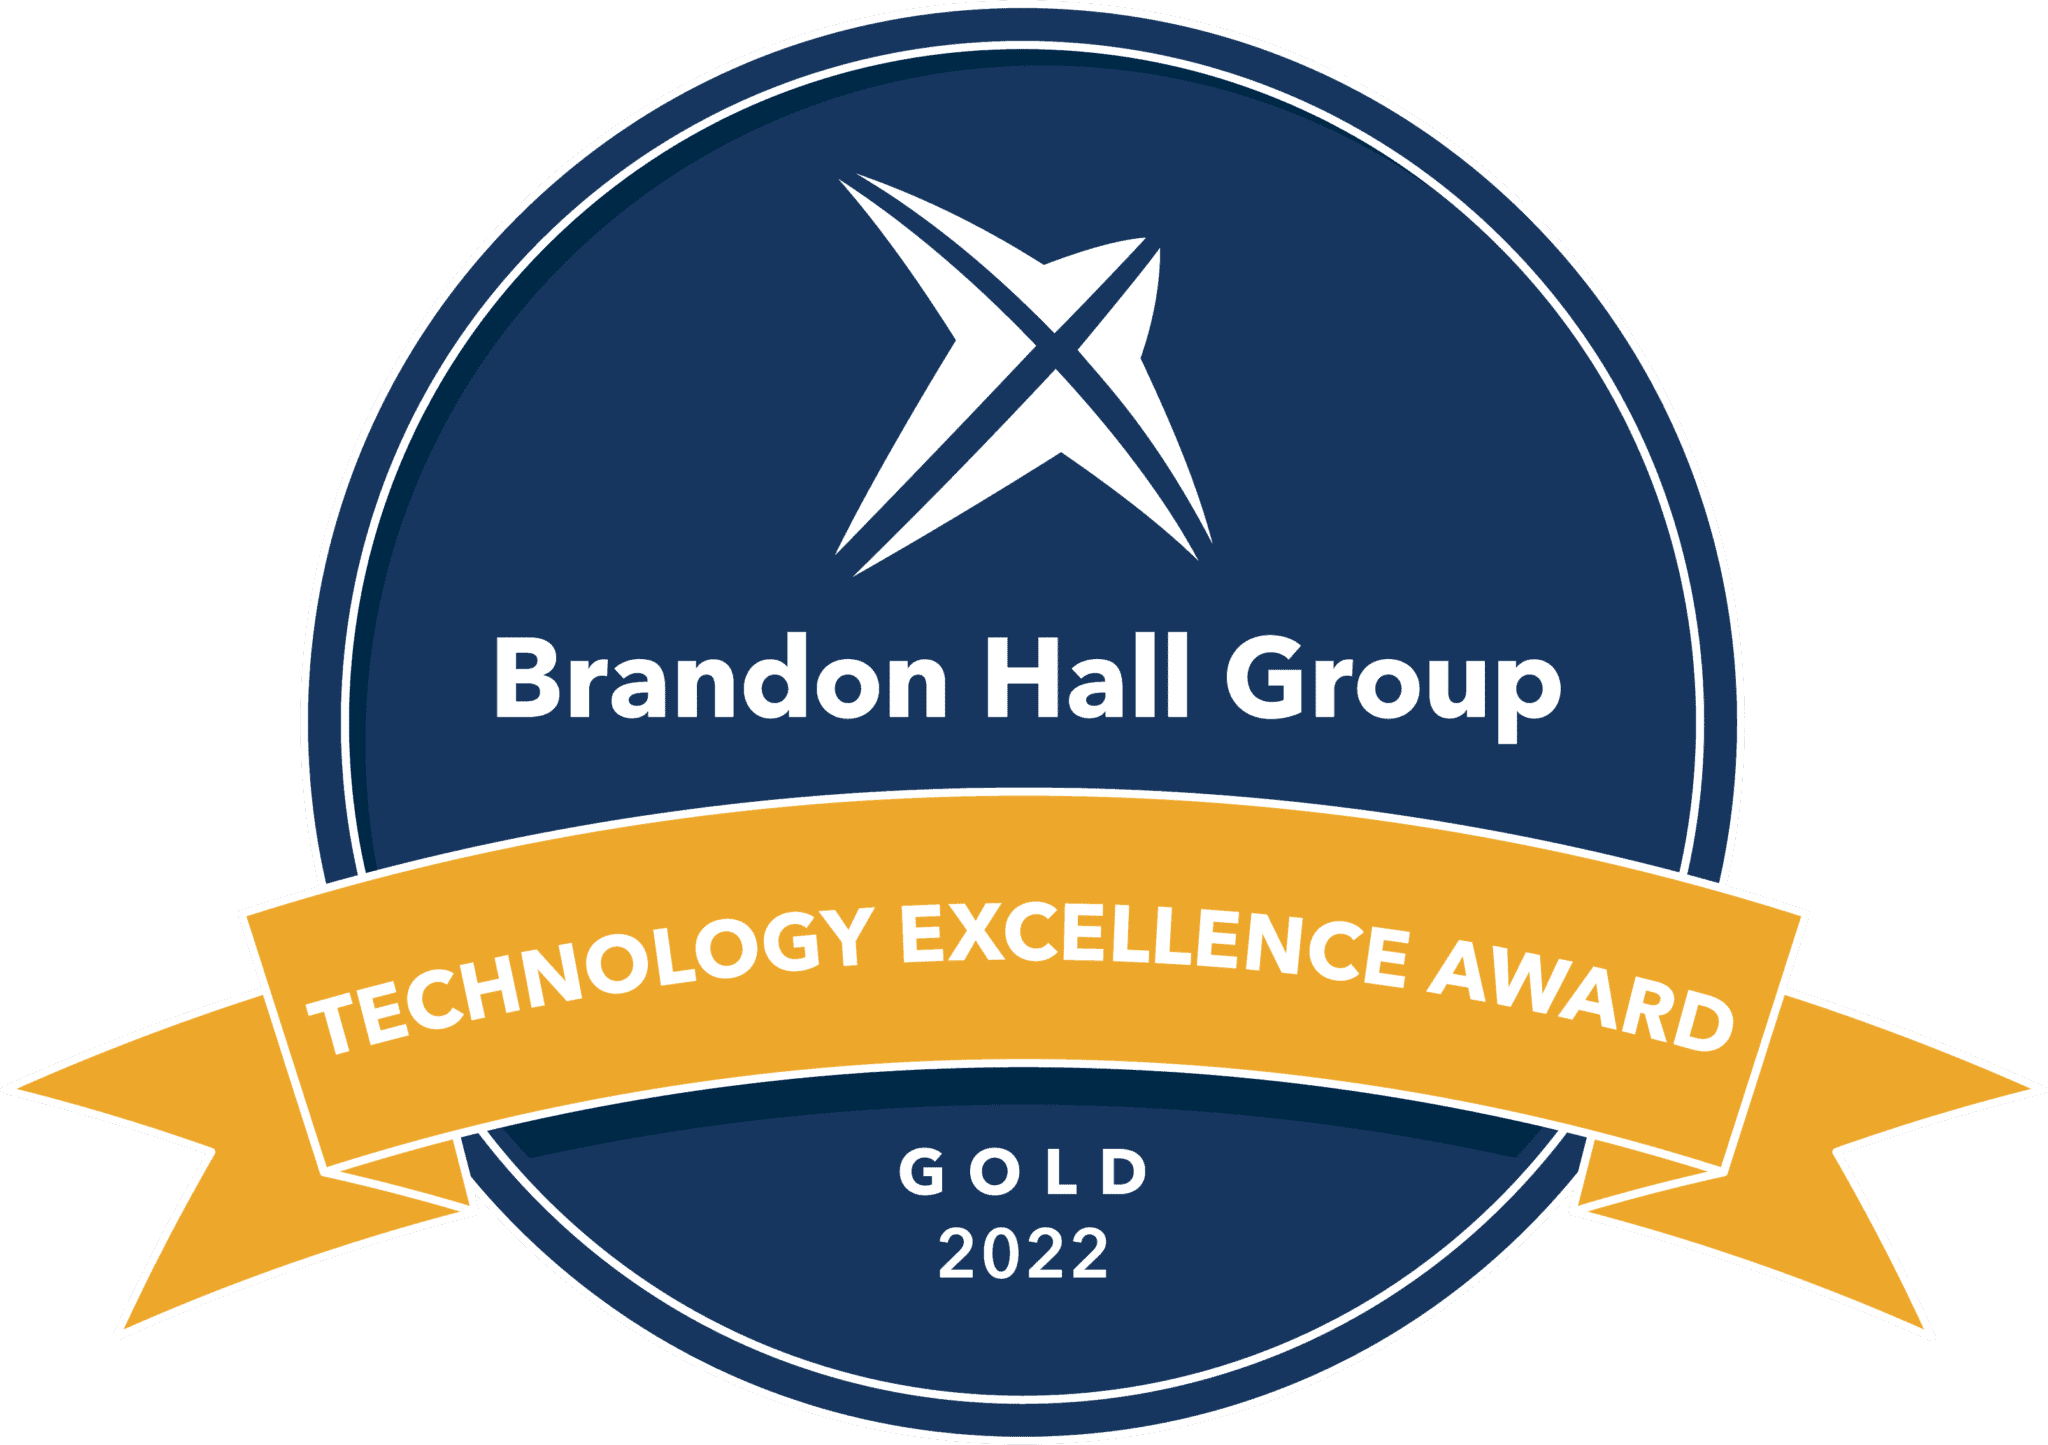 Logo for LinkedIn Partners with Workhuman to win Gold at Brandon Hall Awards